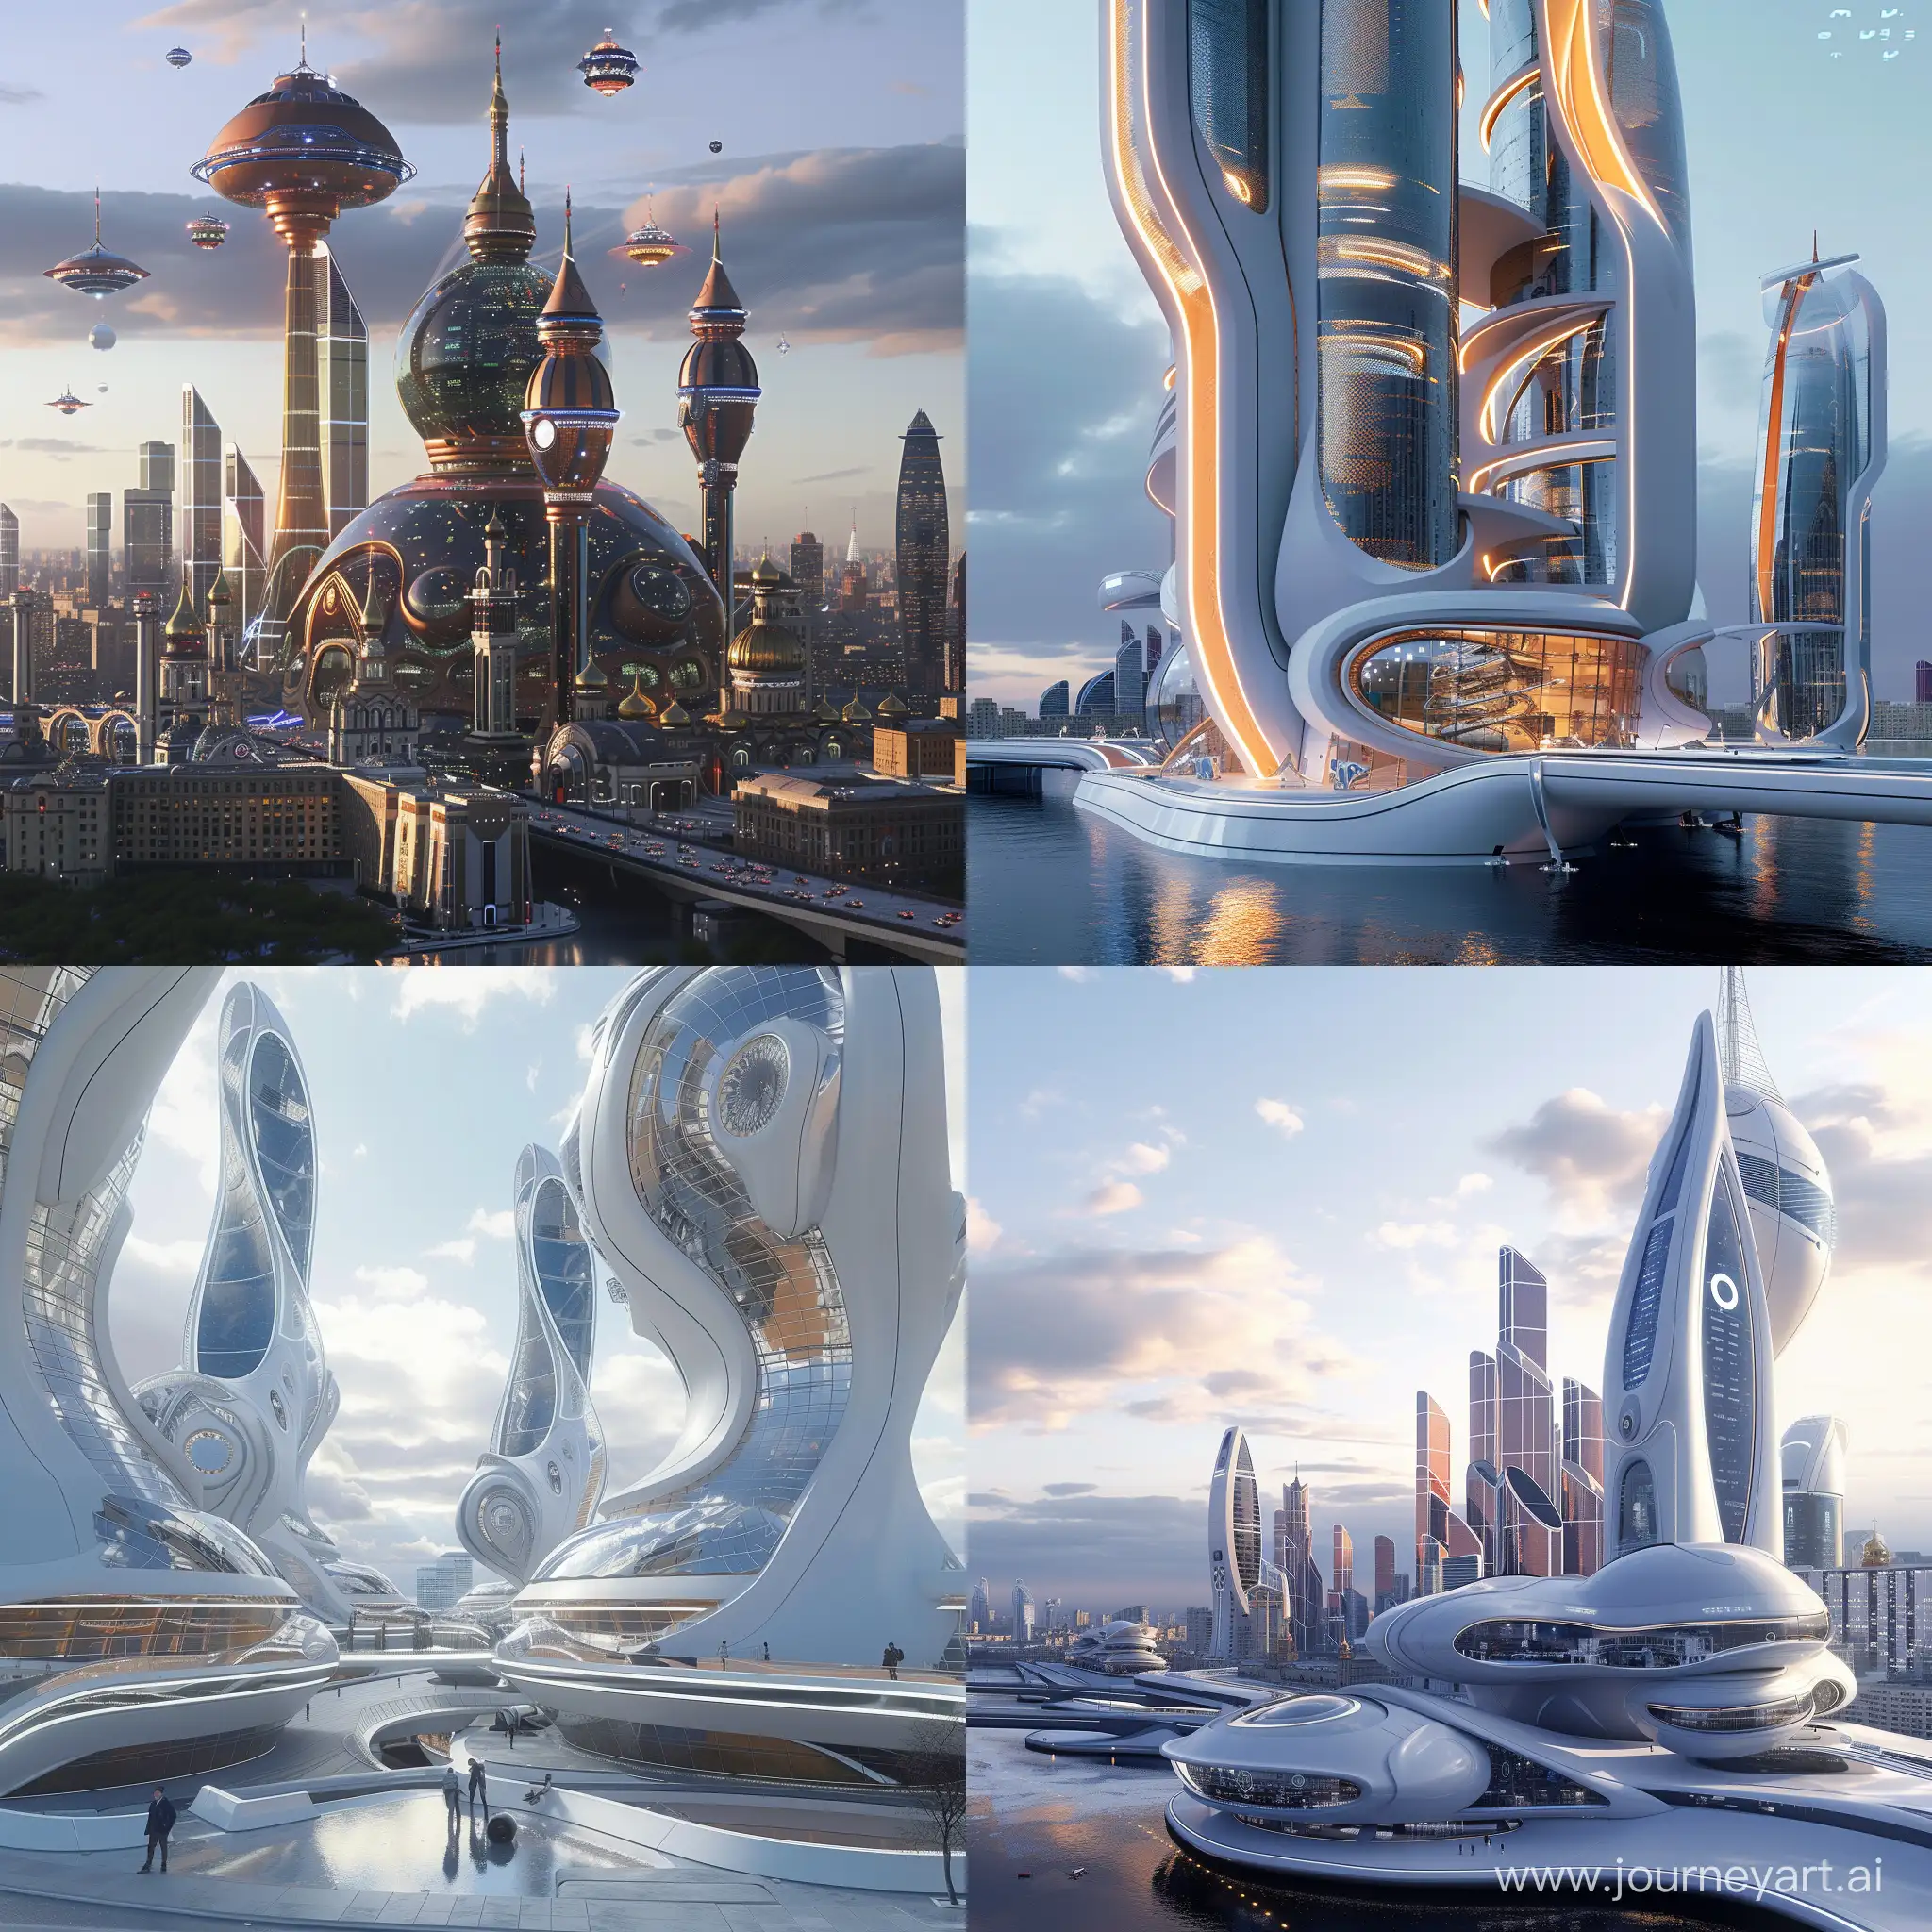 Futuristic-Moscow-Cityscape-with-Modern-Architectural-Marvels